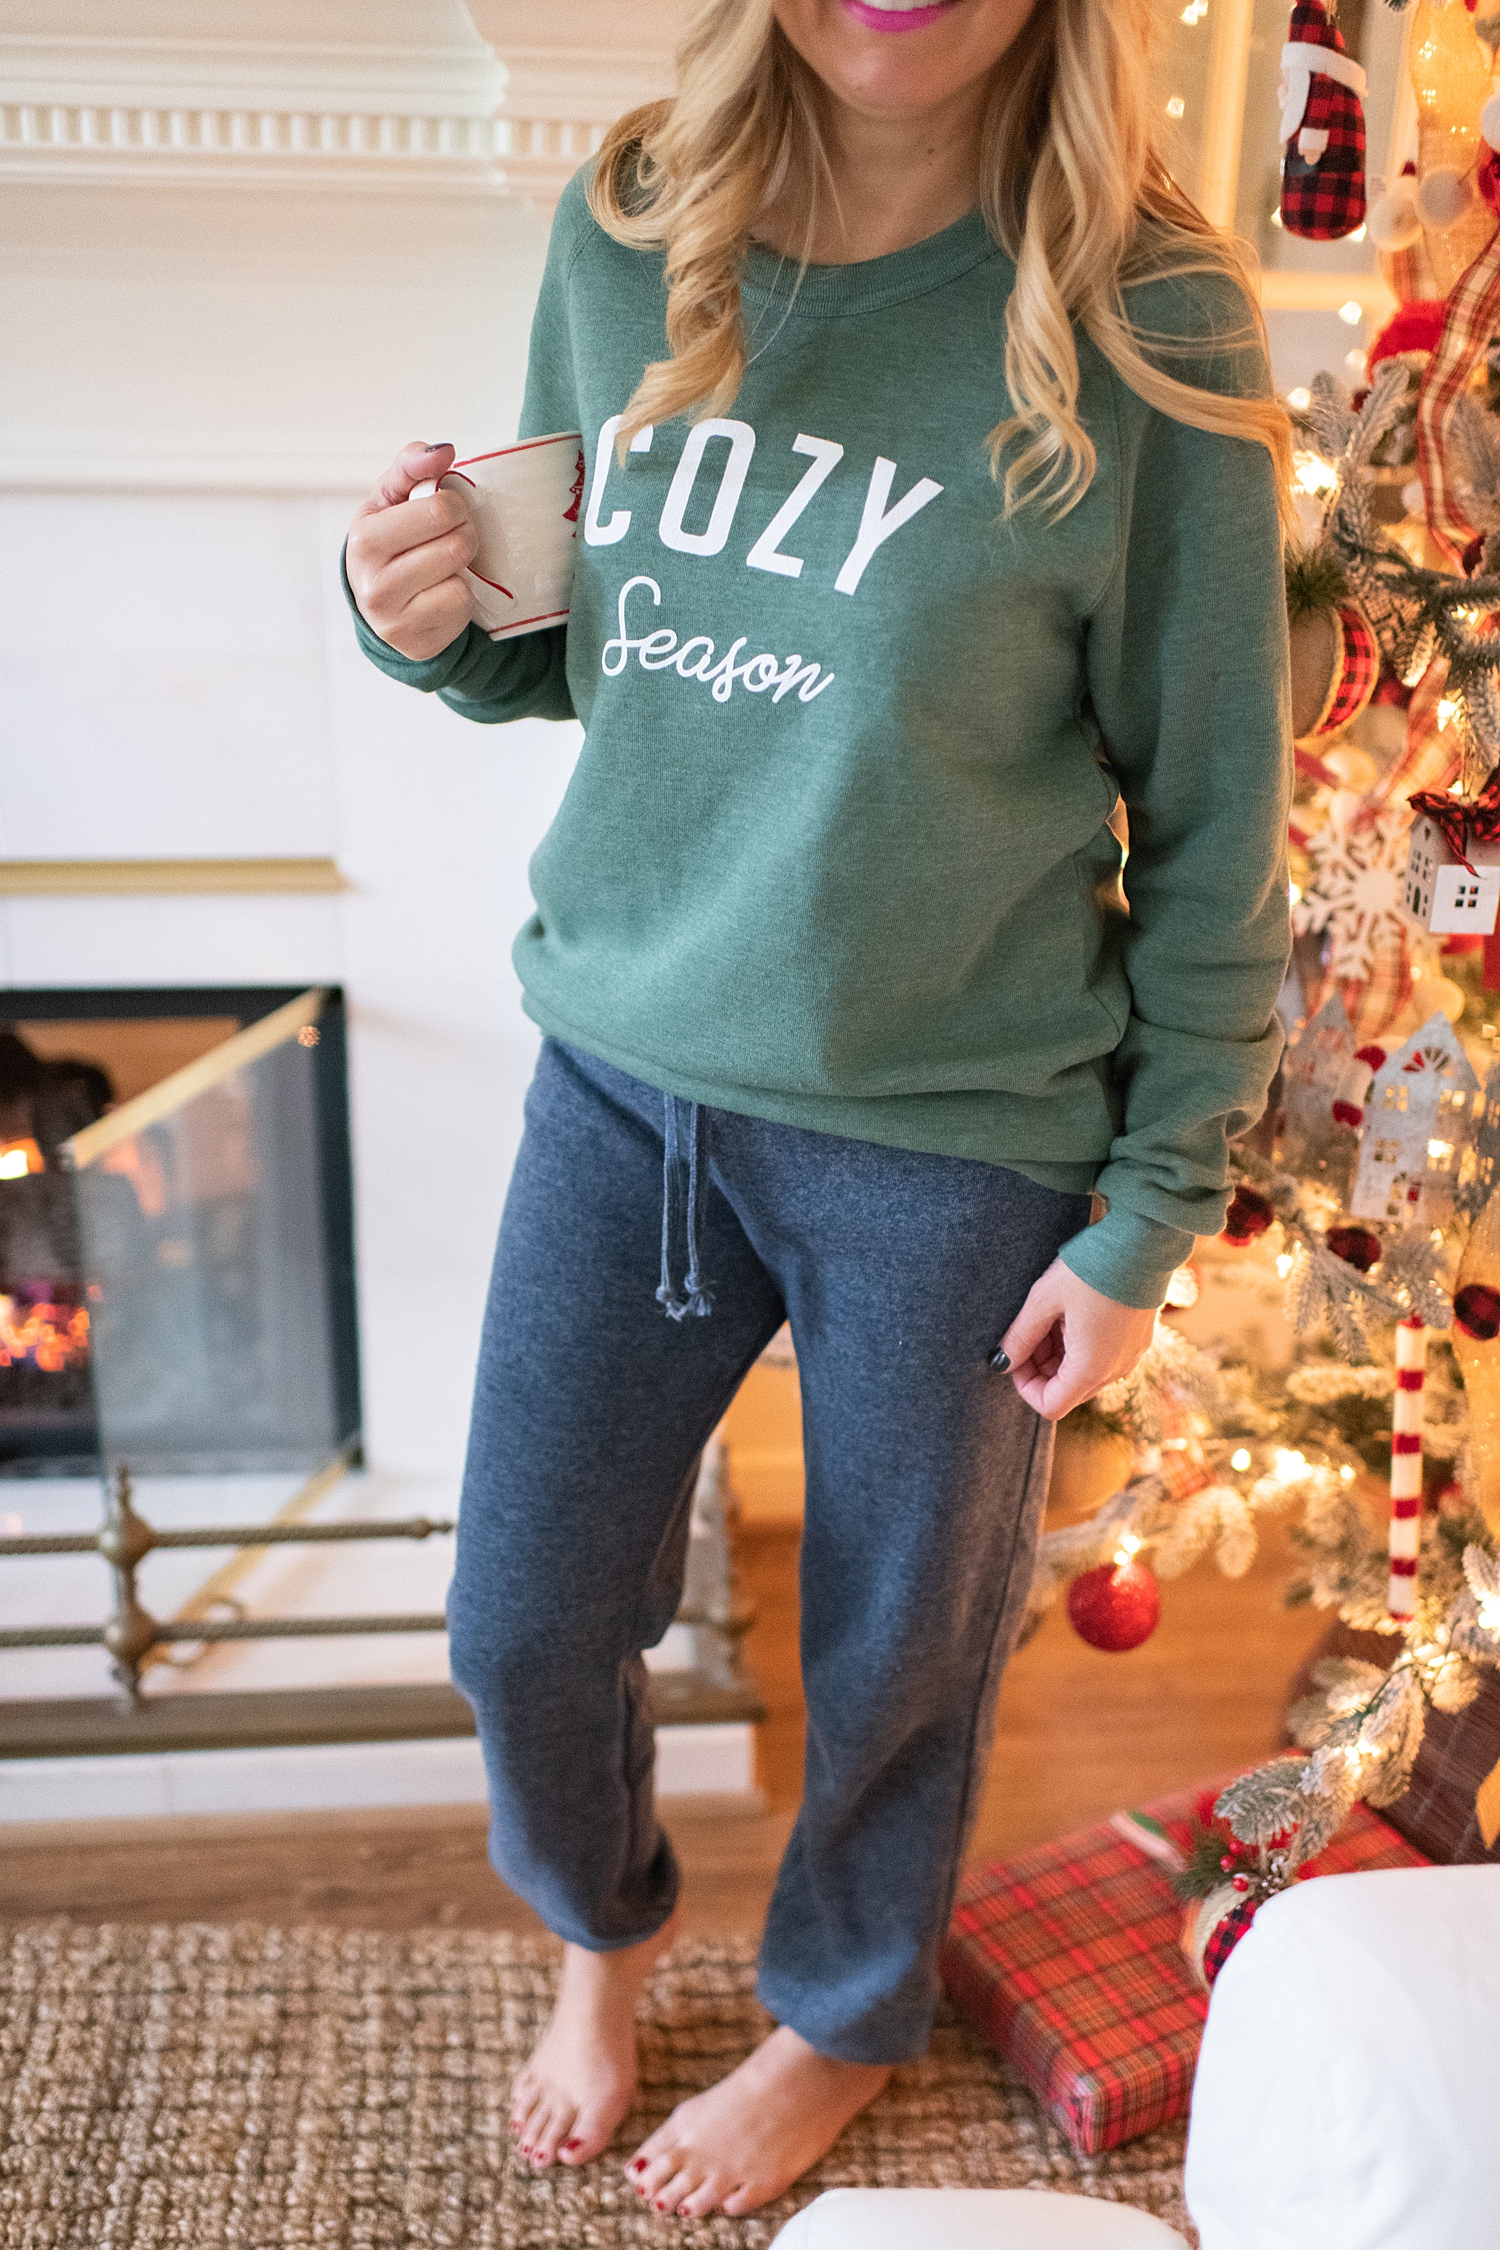 Fancy Ashley x Social Threads collection featured by top Houston fashion blogger, Fancy Ashley: image of a woman wearing a Social Threads cozy sweatshirt and Social Threads navy sweatpants